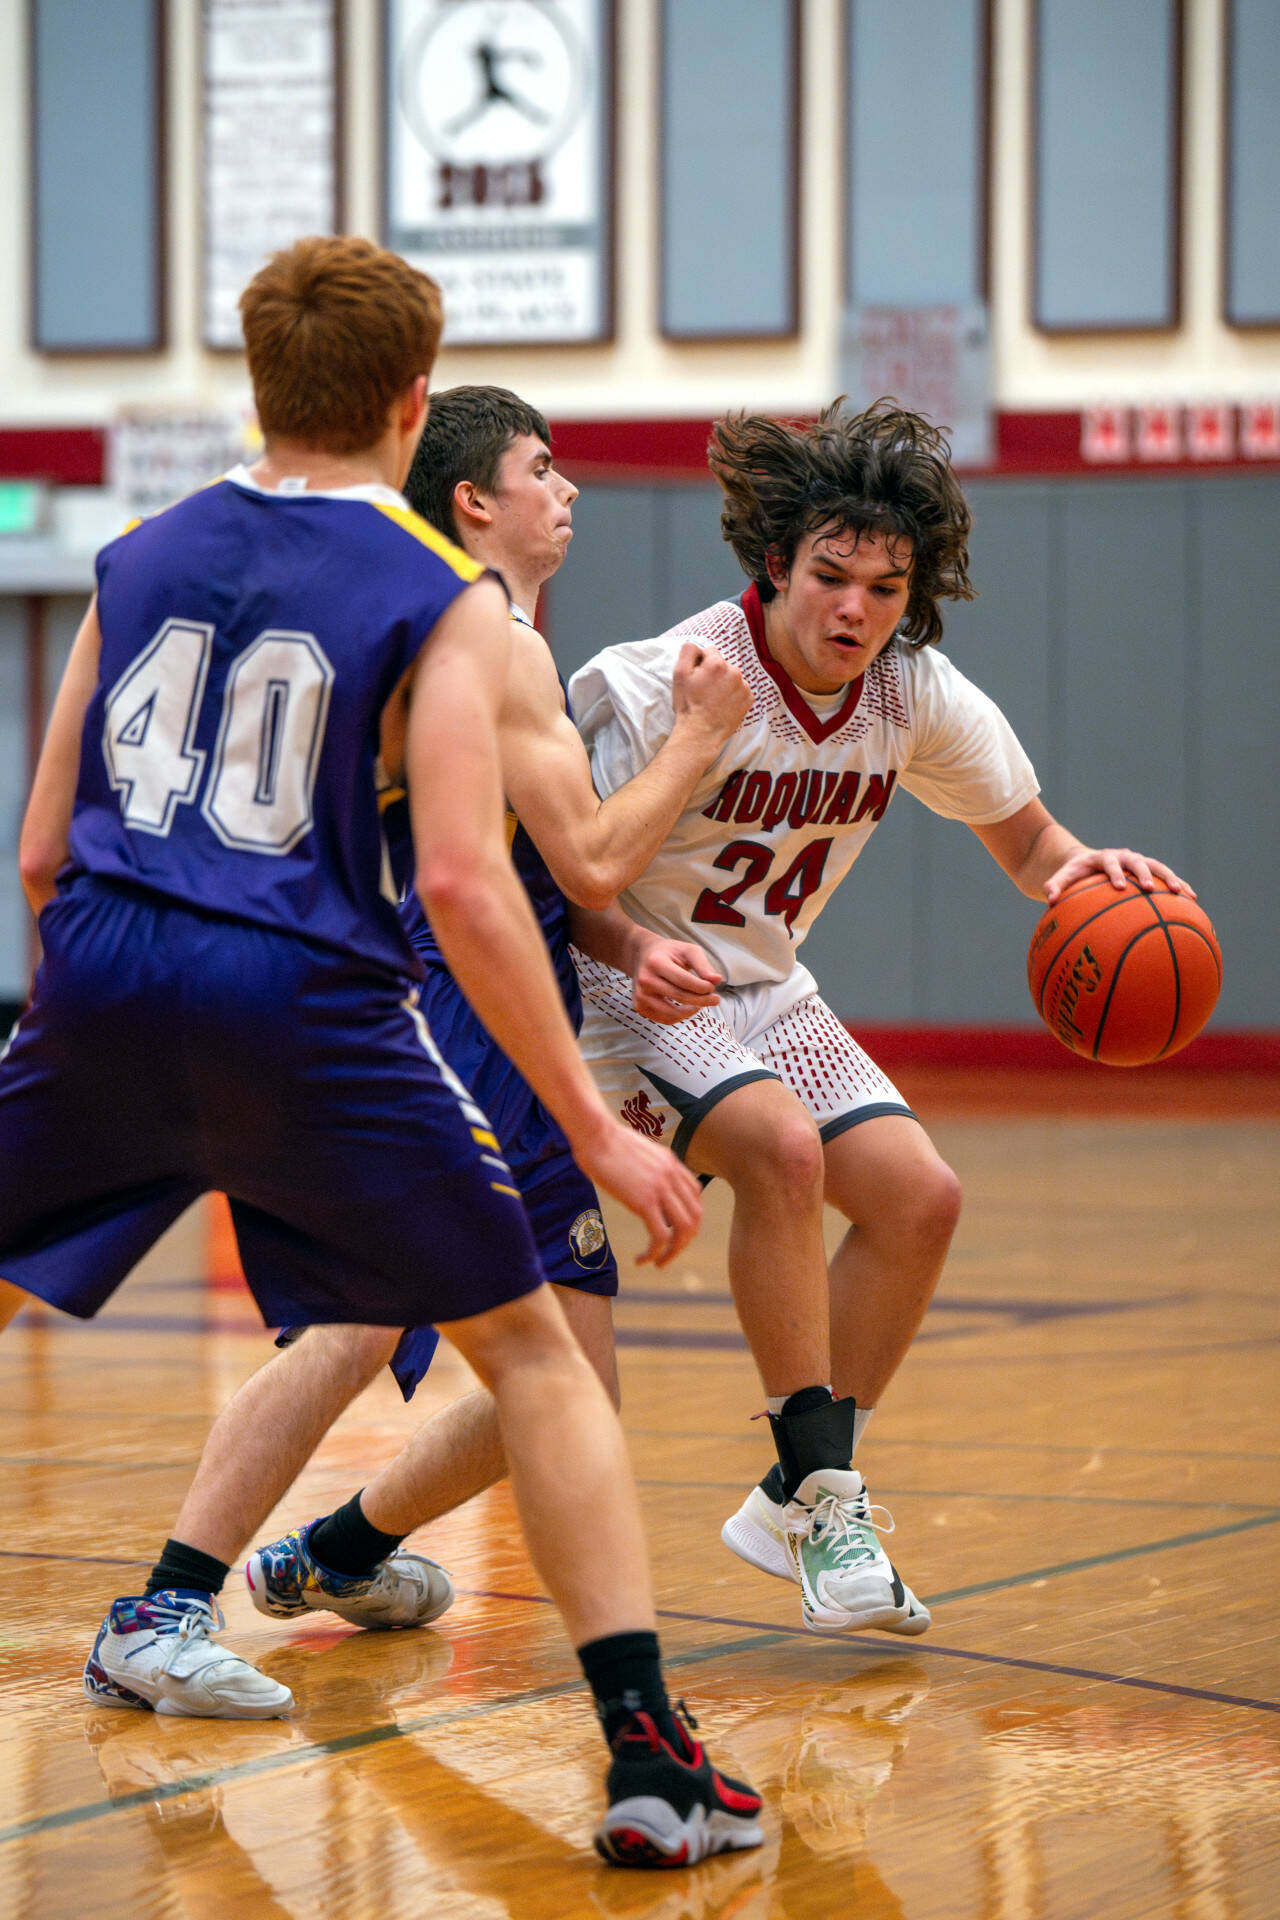 PHOTO BY FOREST WORGUM Hoquiam guard Lincoln Niemi (24) dribbles against Onalaska in an 86-44 win on Thursday in Hoquiam.